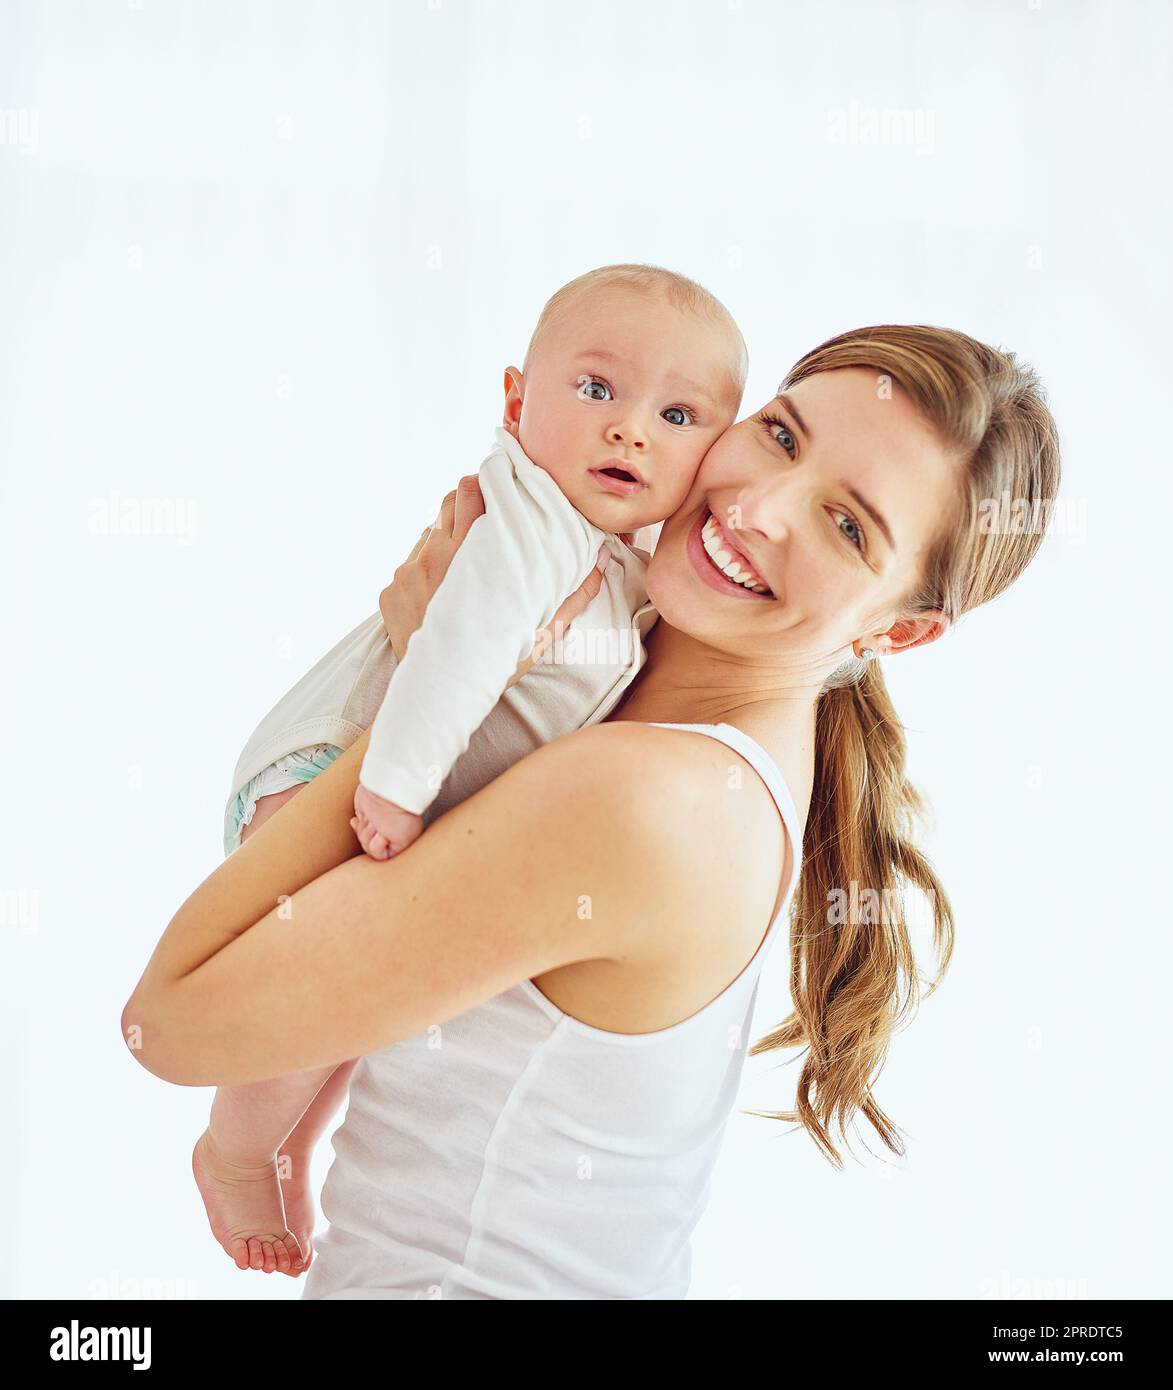 Portrait of a happy young mother hugging her cute baby boy at home, bonding and enjoying parenthood. Single parent being playful and affectionate, embracing precious moments with her new born child Stock Photo